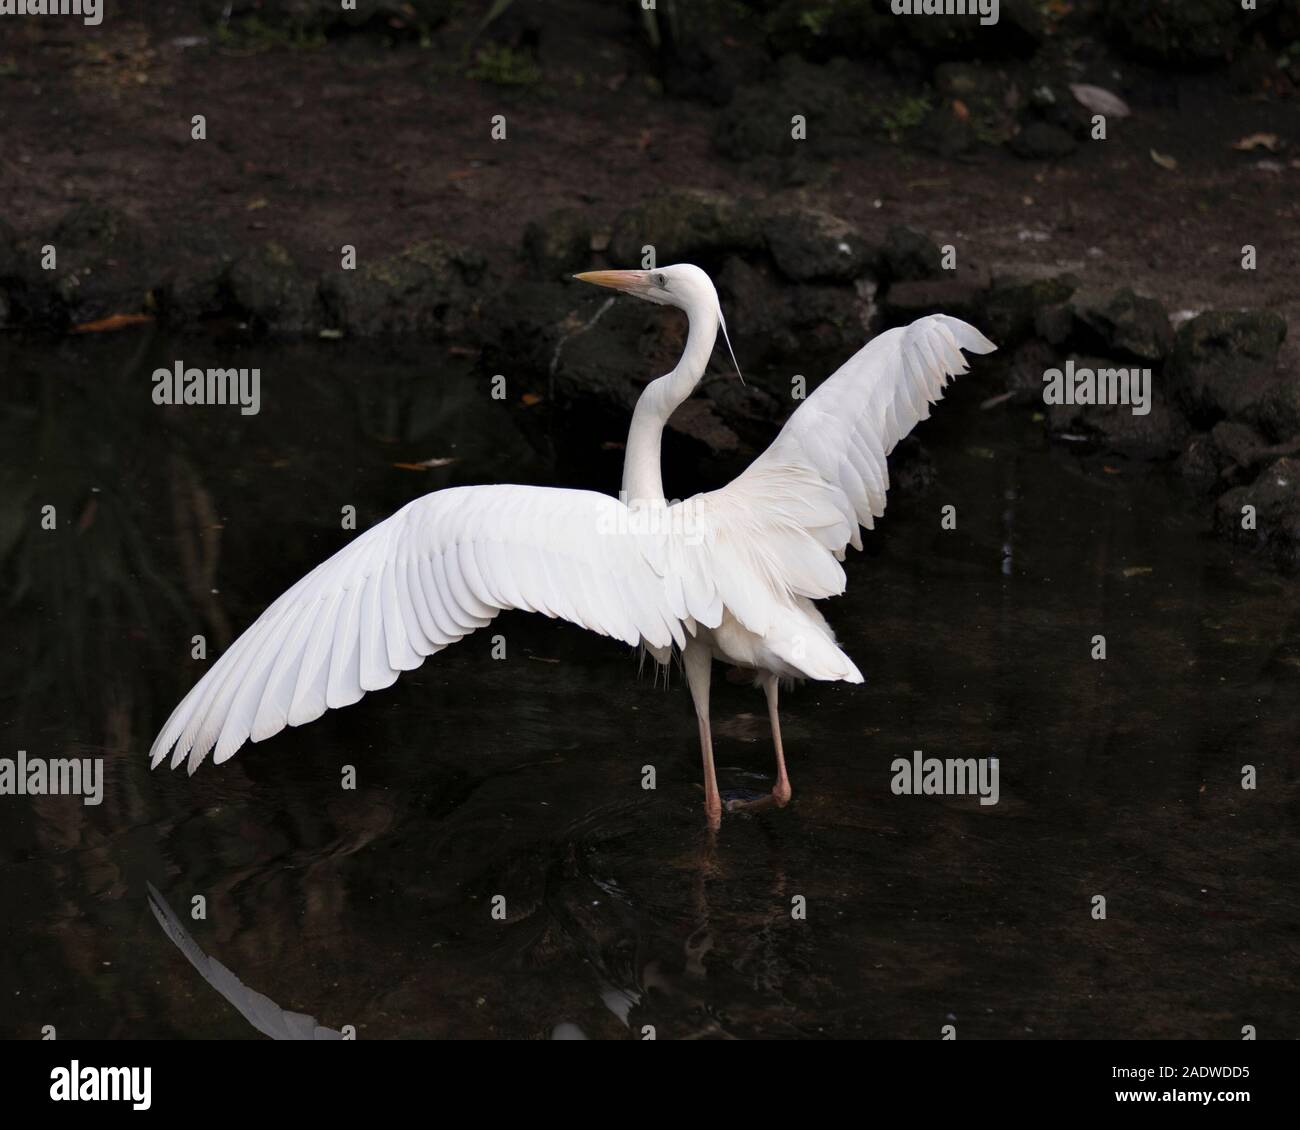 White Heron bird close-up profile view in the water with spread wings displaying its body, head, eye, beak, long neck, with a black contrast backgroun Stock Photo